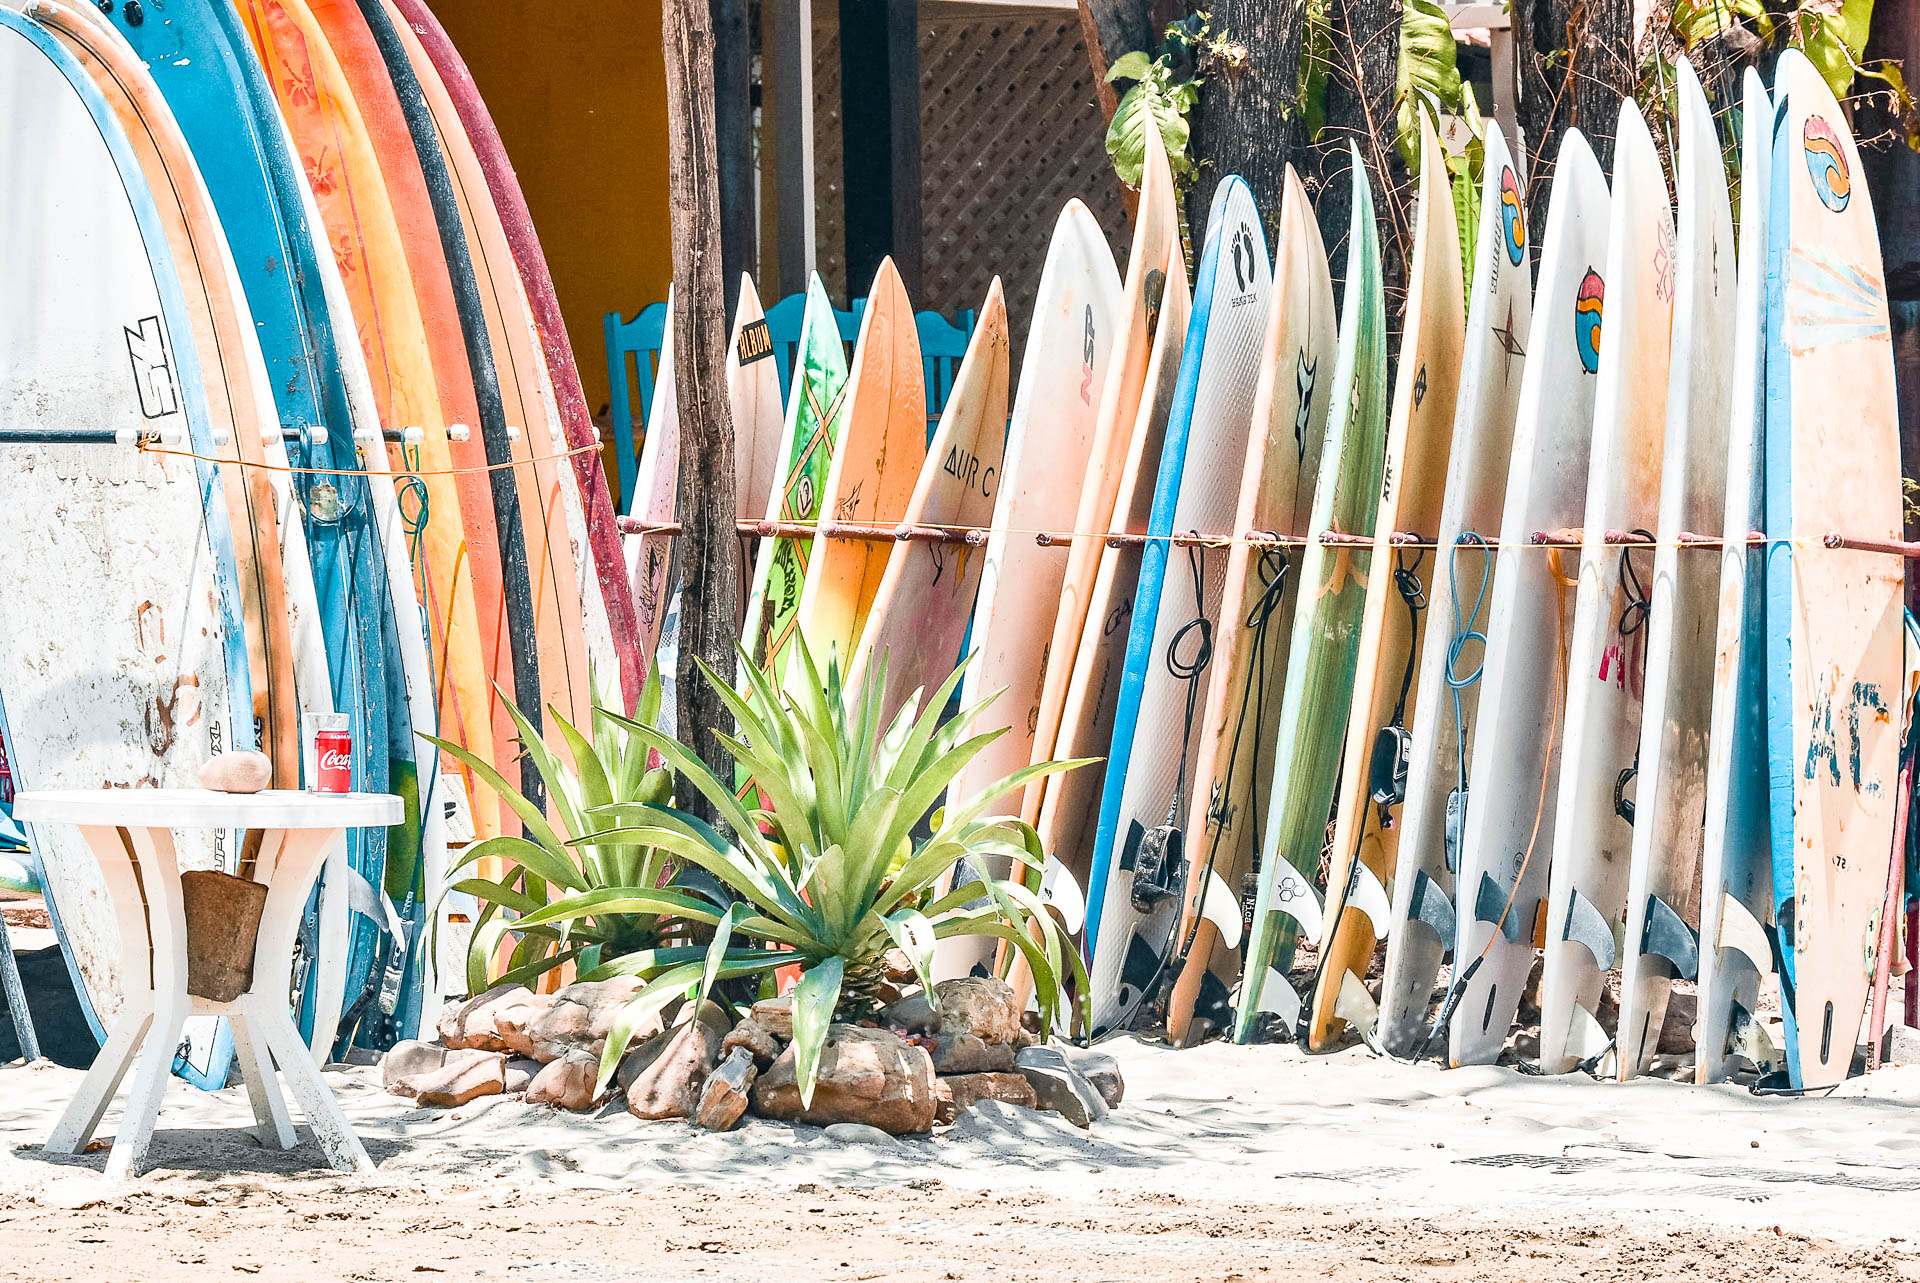 Multiple surf boards lined up.